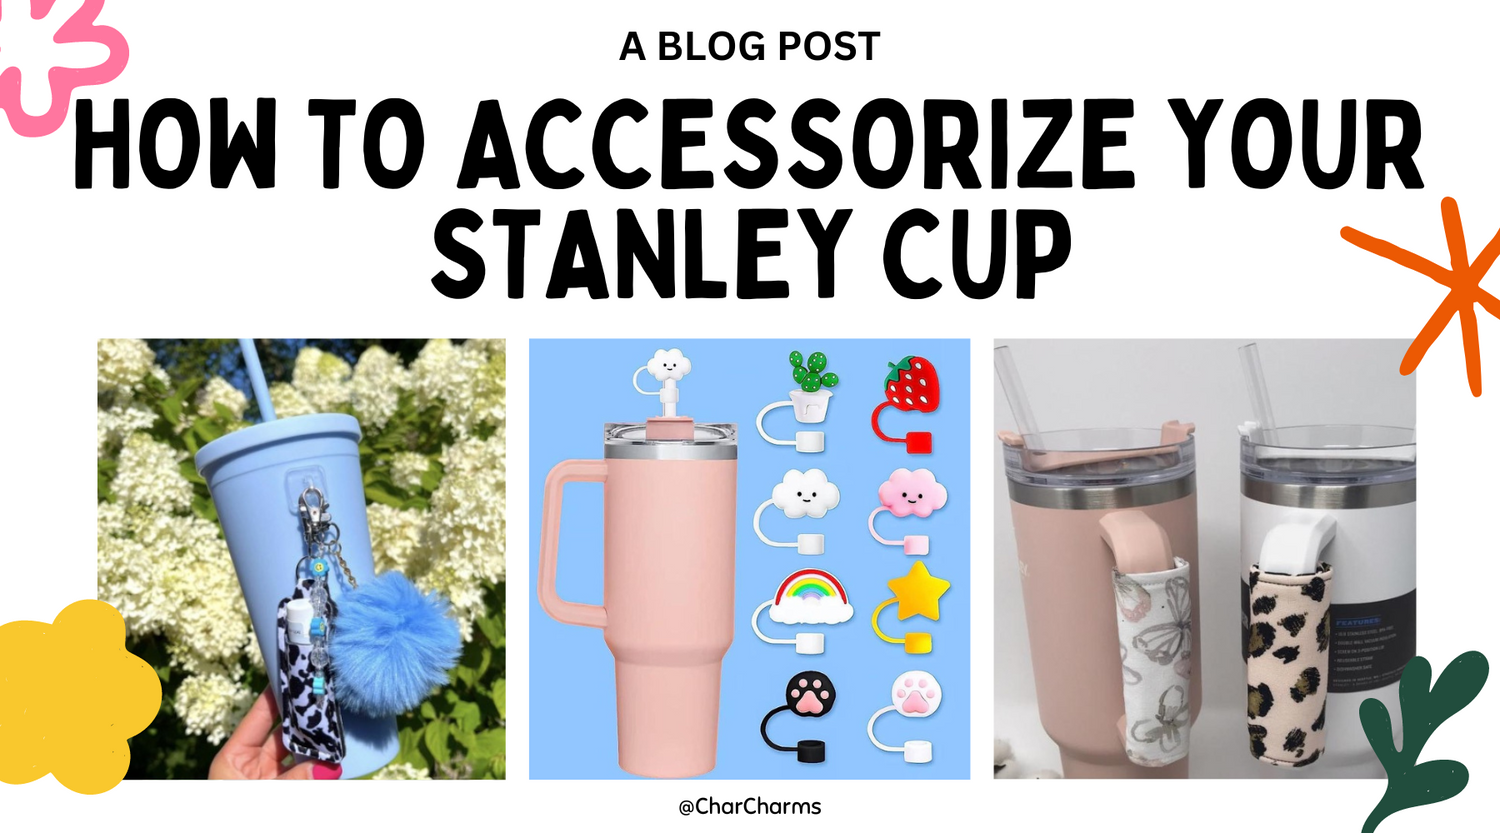 How To Accessorize Your Stanley Cup